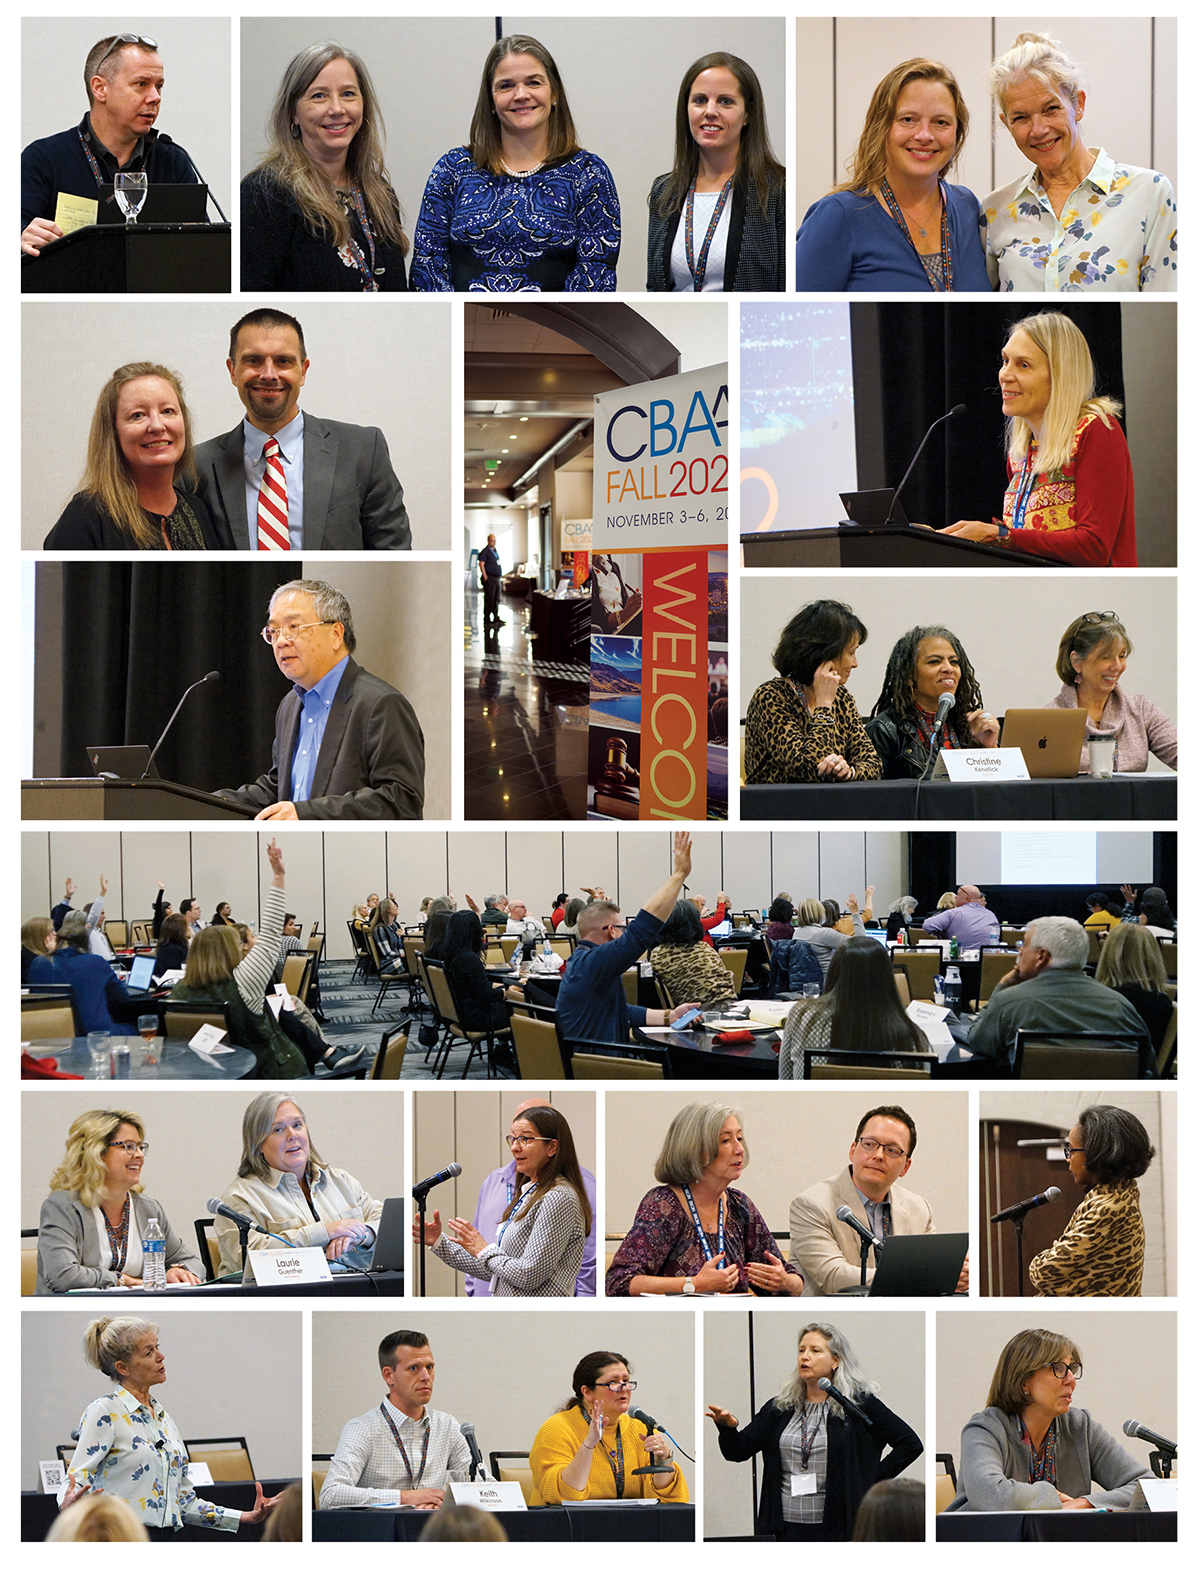 Collage of photos from the CBAA Fall Meeting depicting scenes including: speakers at podiums and roundtable discussions, meeting participant group shots, and welcome signage.